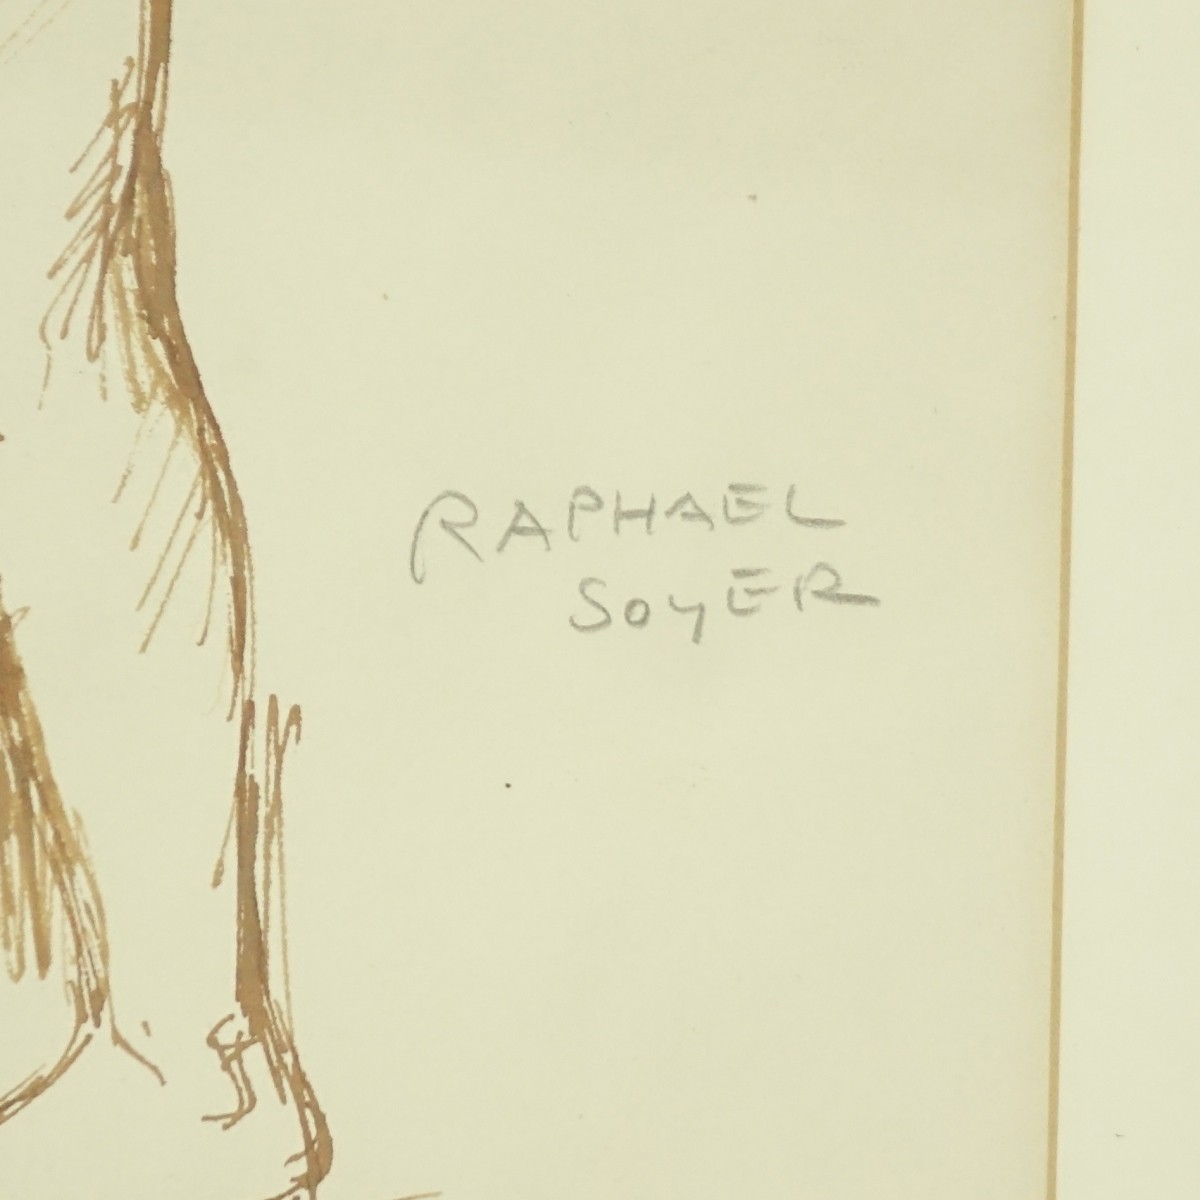 Raphael Soyer (1899 - 1987) Watercolor Drawing - Image 3 of 5